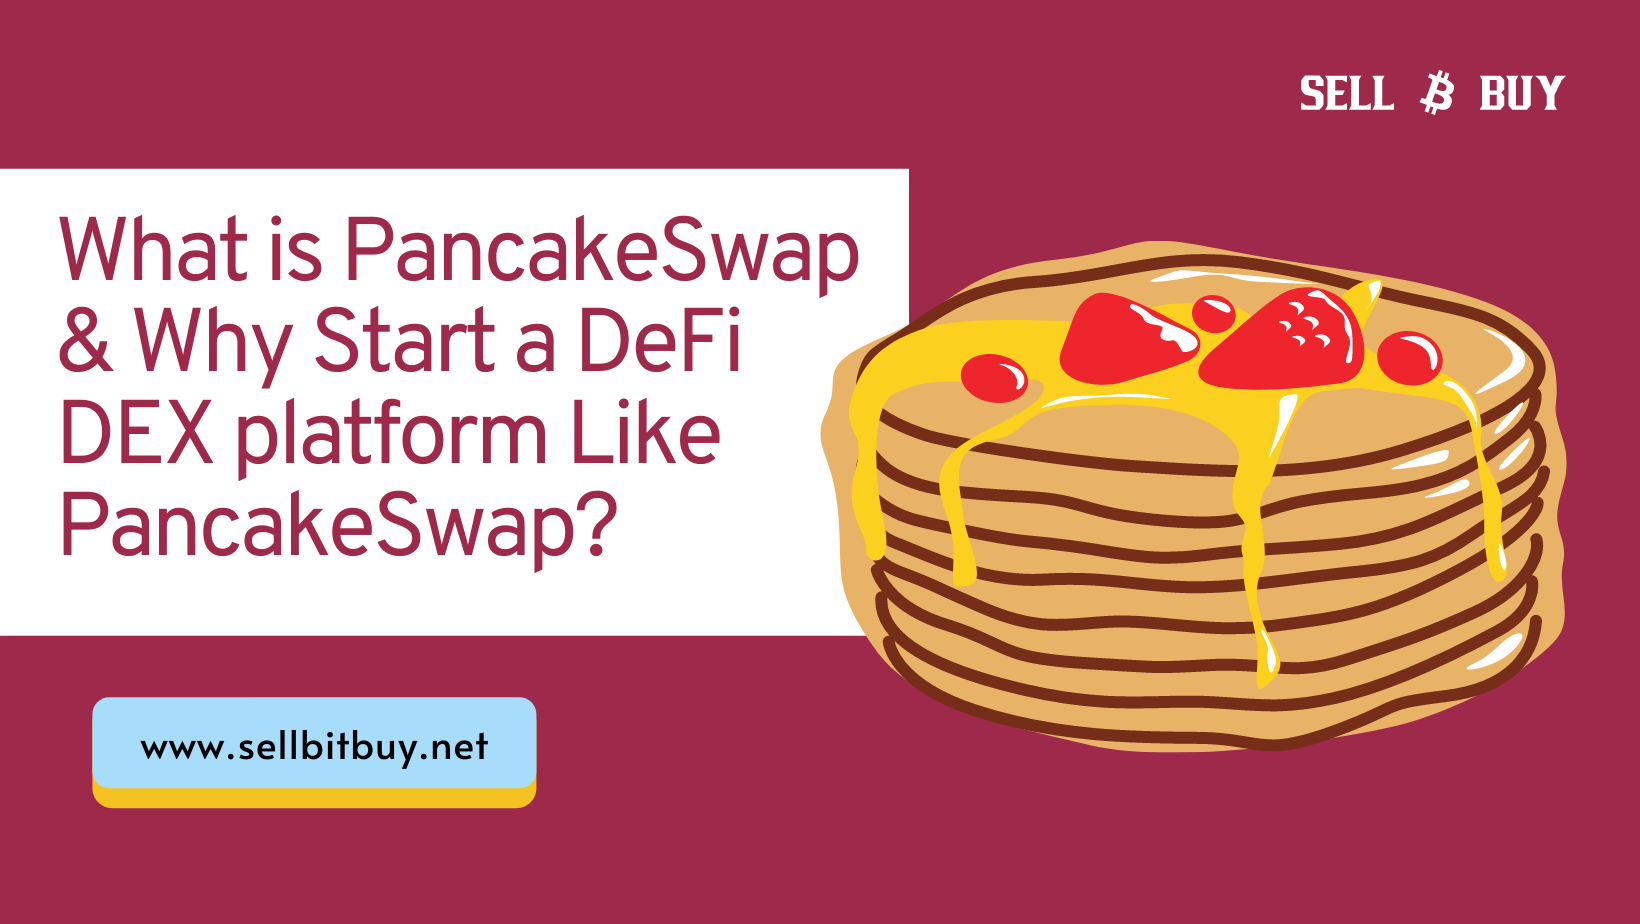 Article about What is PancakeSwap & Why Start a DeFi DEX platform Like PancakeSwap